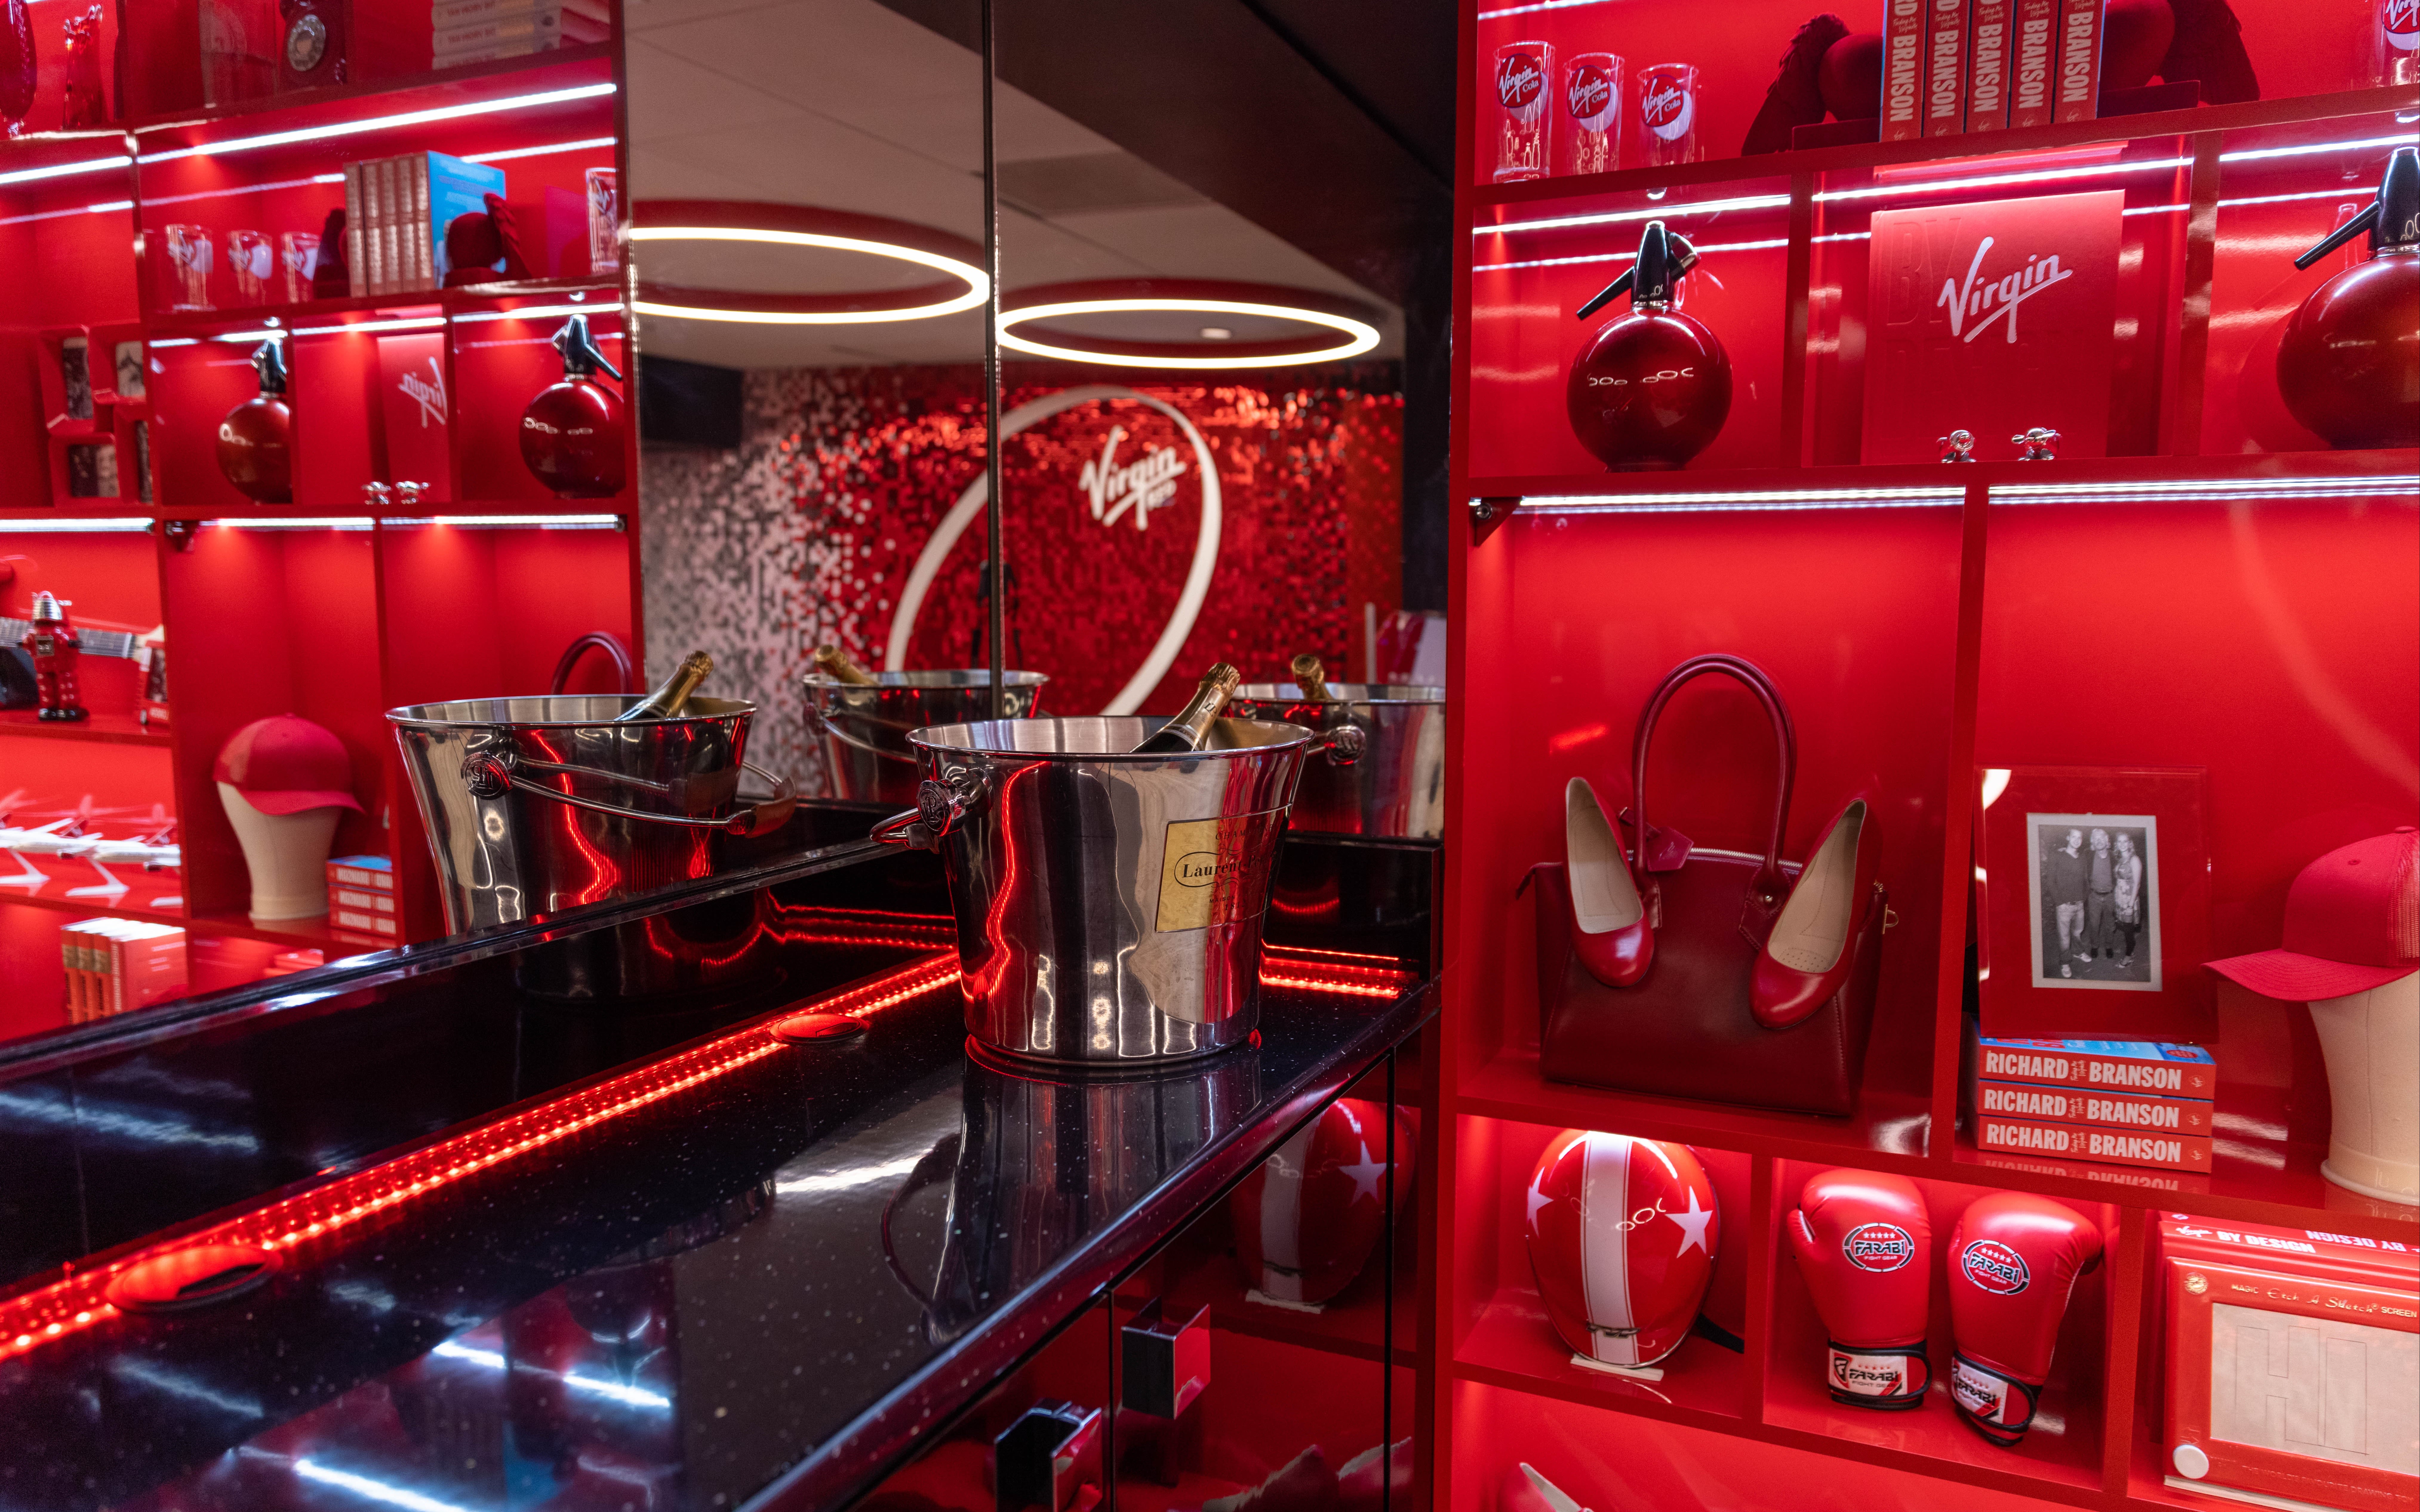 An image of the Virgin Red Room at AO Arena Manchester